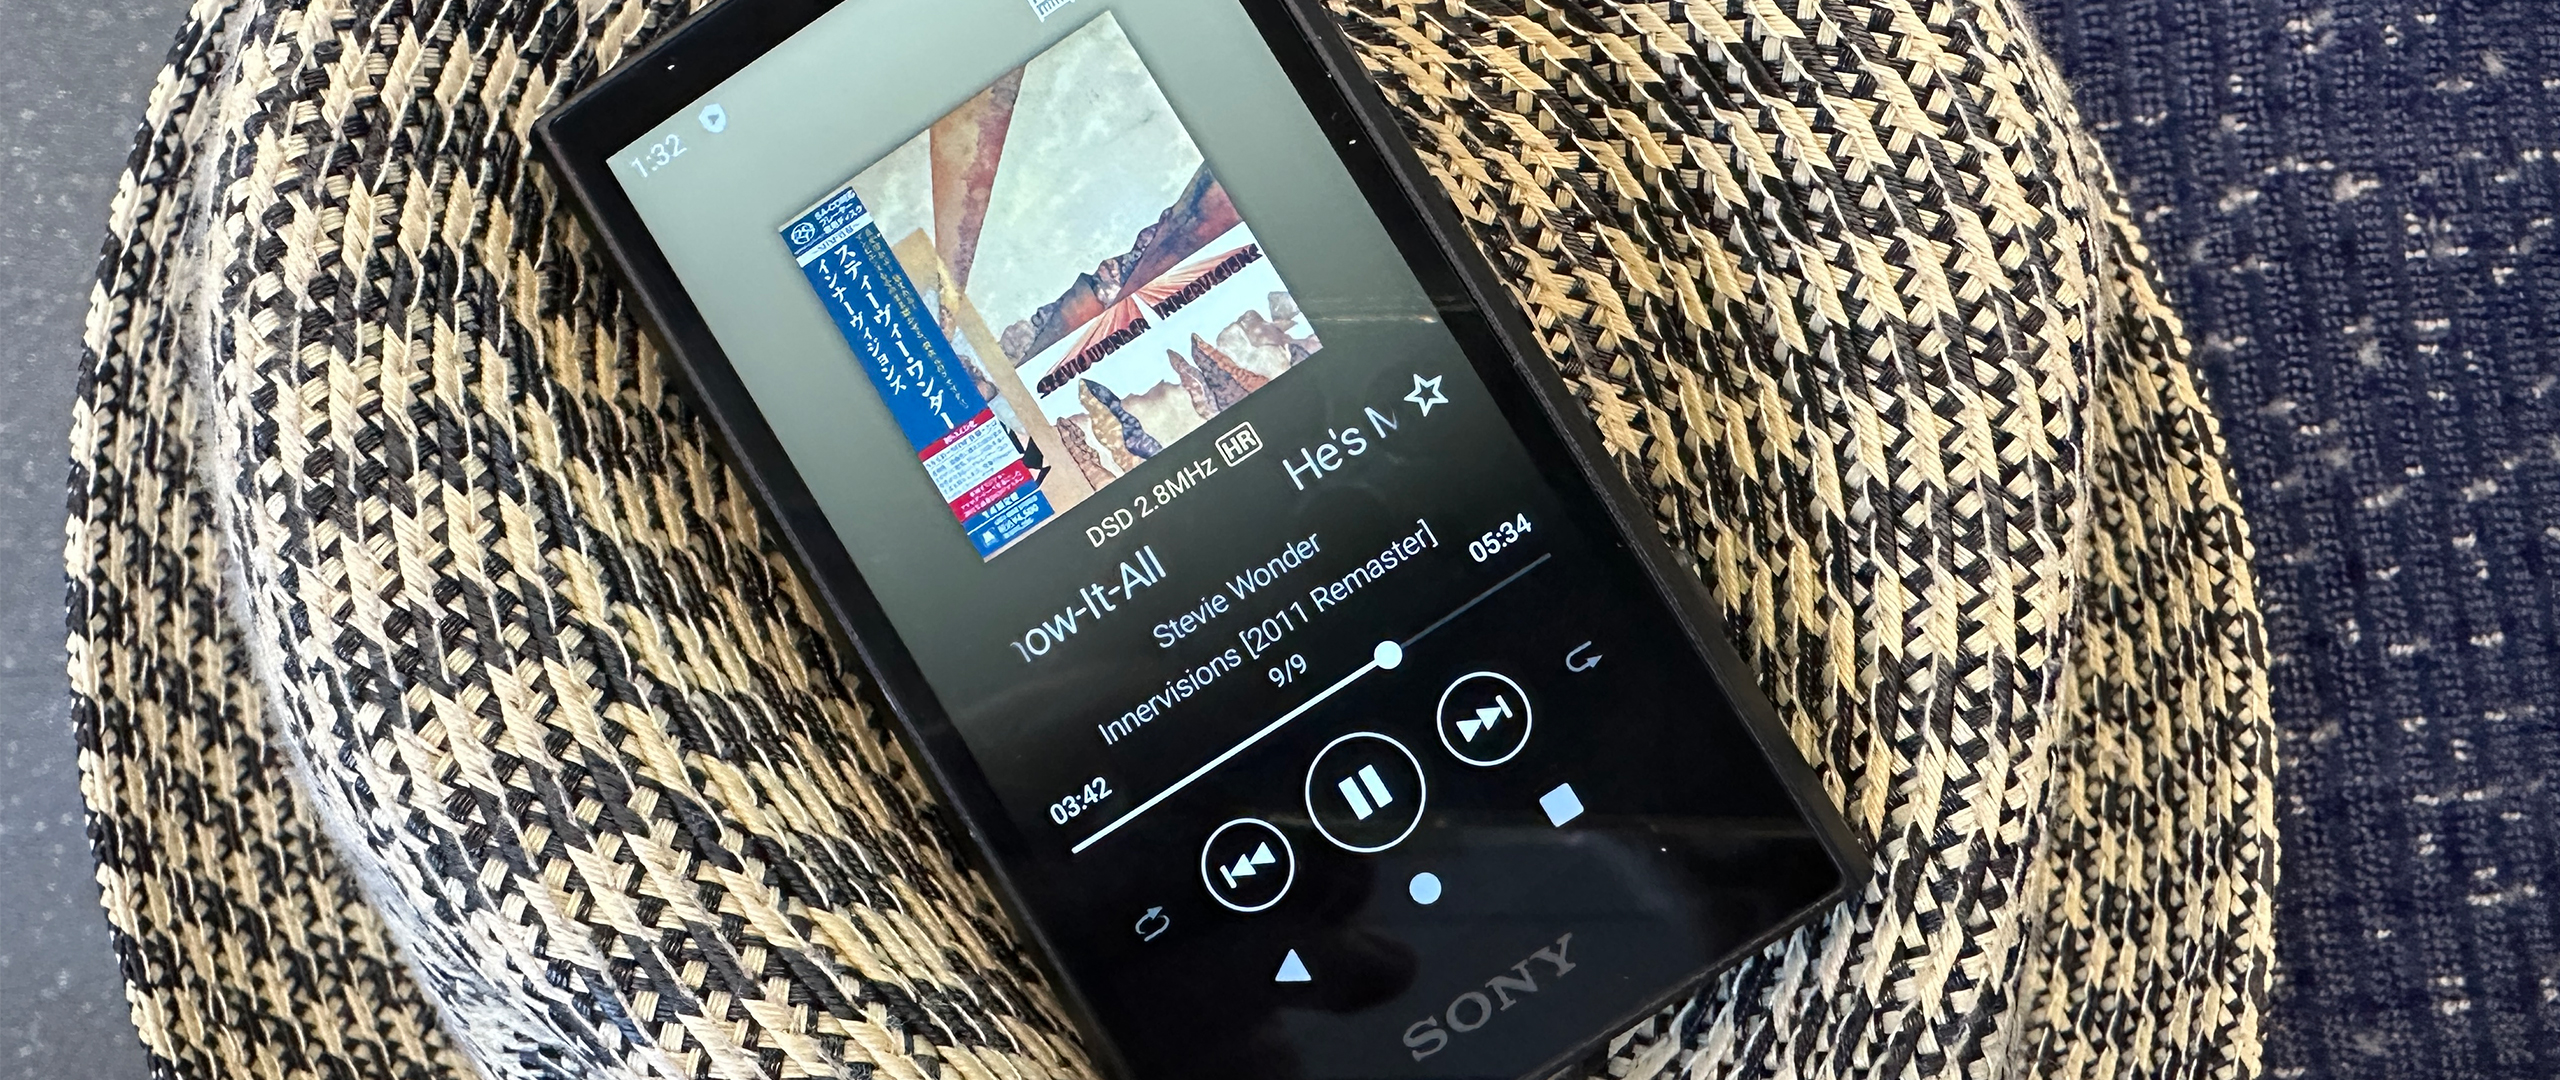 Sony NW-A306 review: a small but mighty digital audio player with a